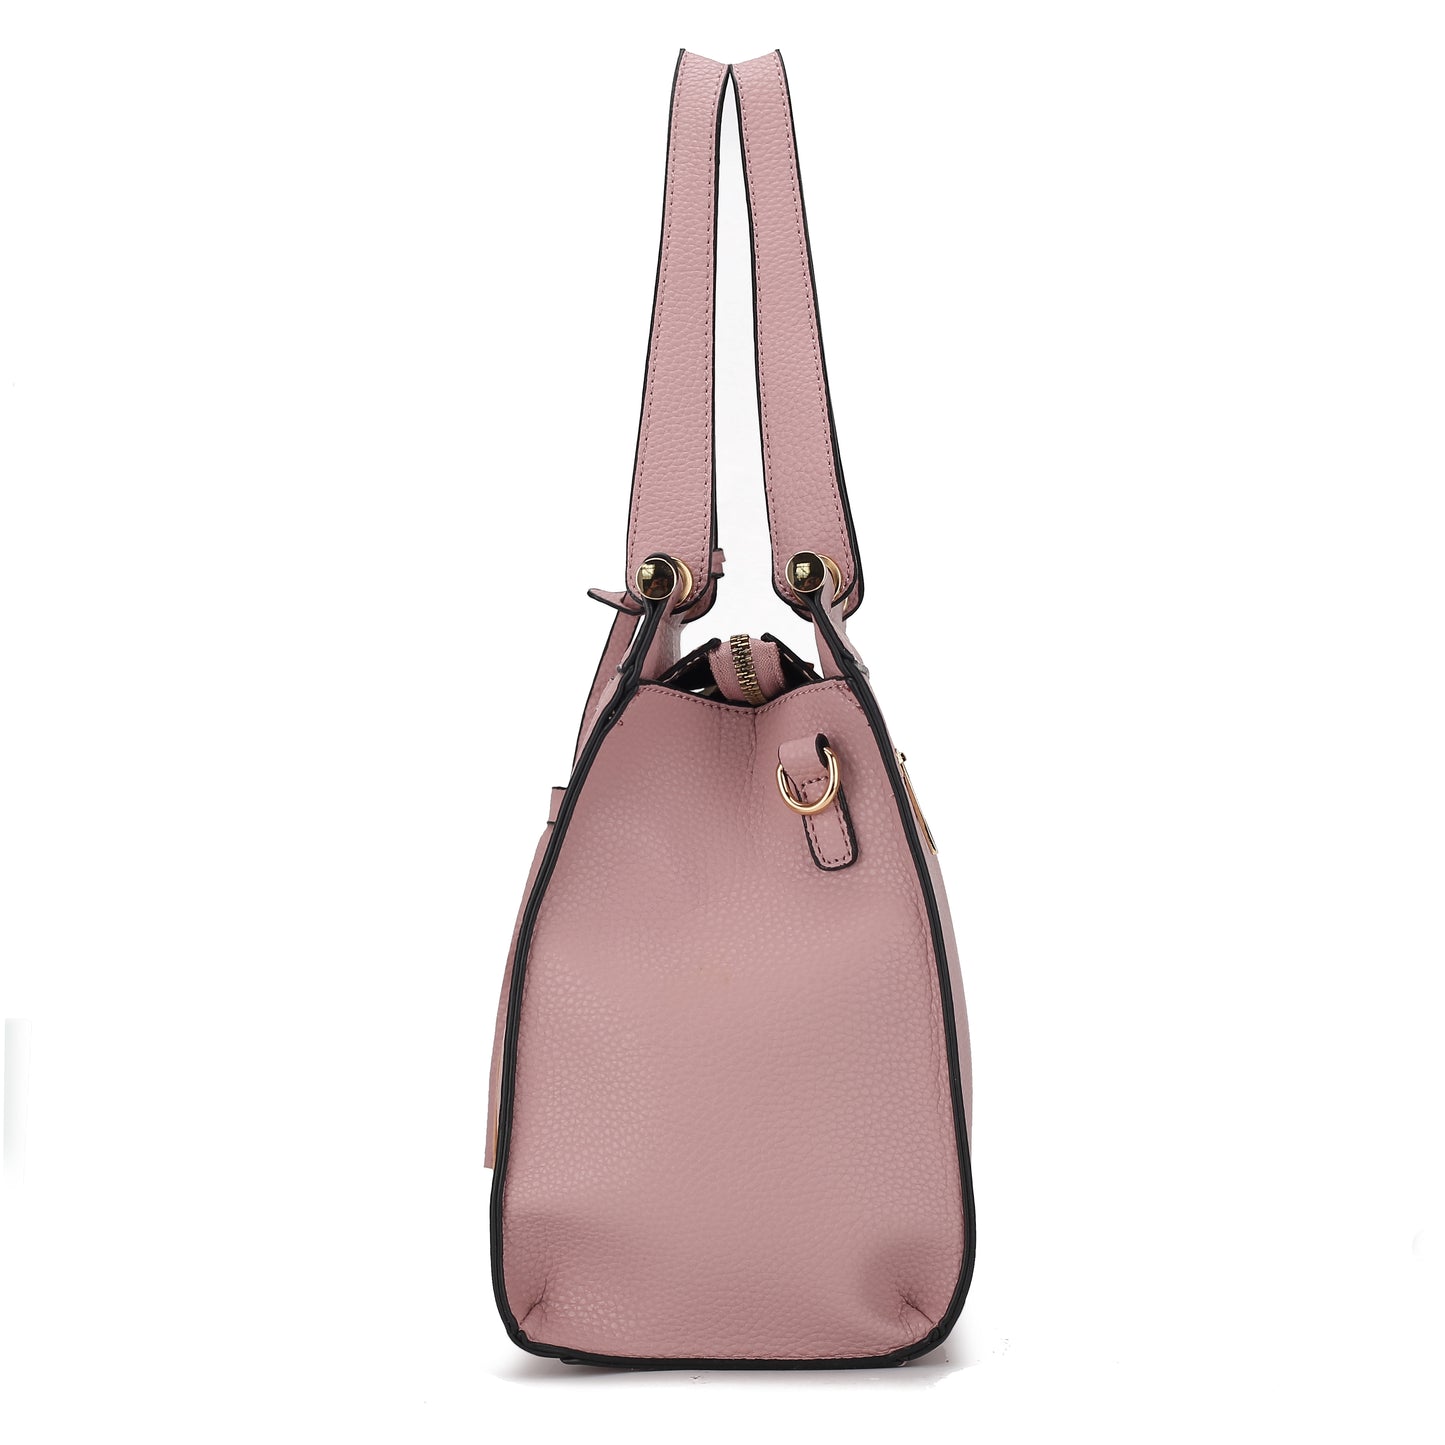 The Pink Orpheus Shelby Satchel Handbag with Wallet Vegan Leather Women is a pink handbag made of vegan leather. It features two handles and a zipper closure.